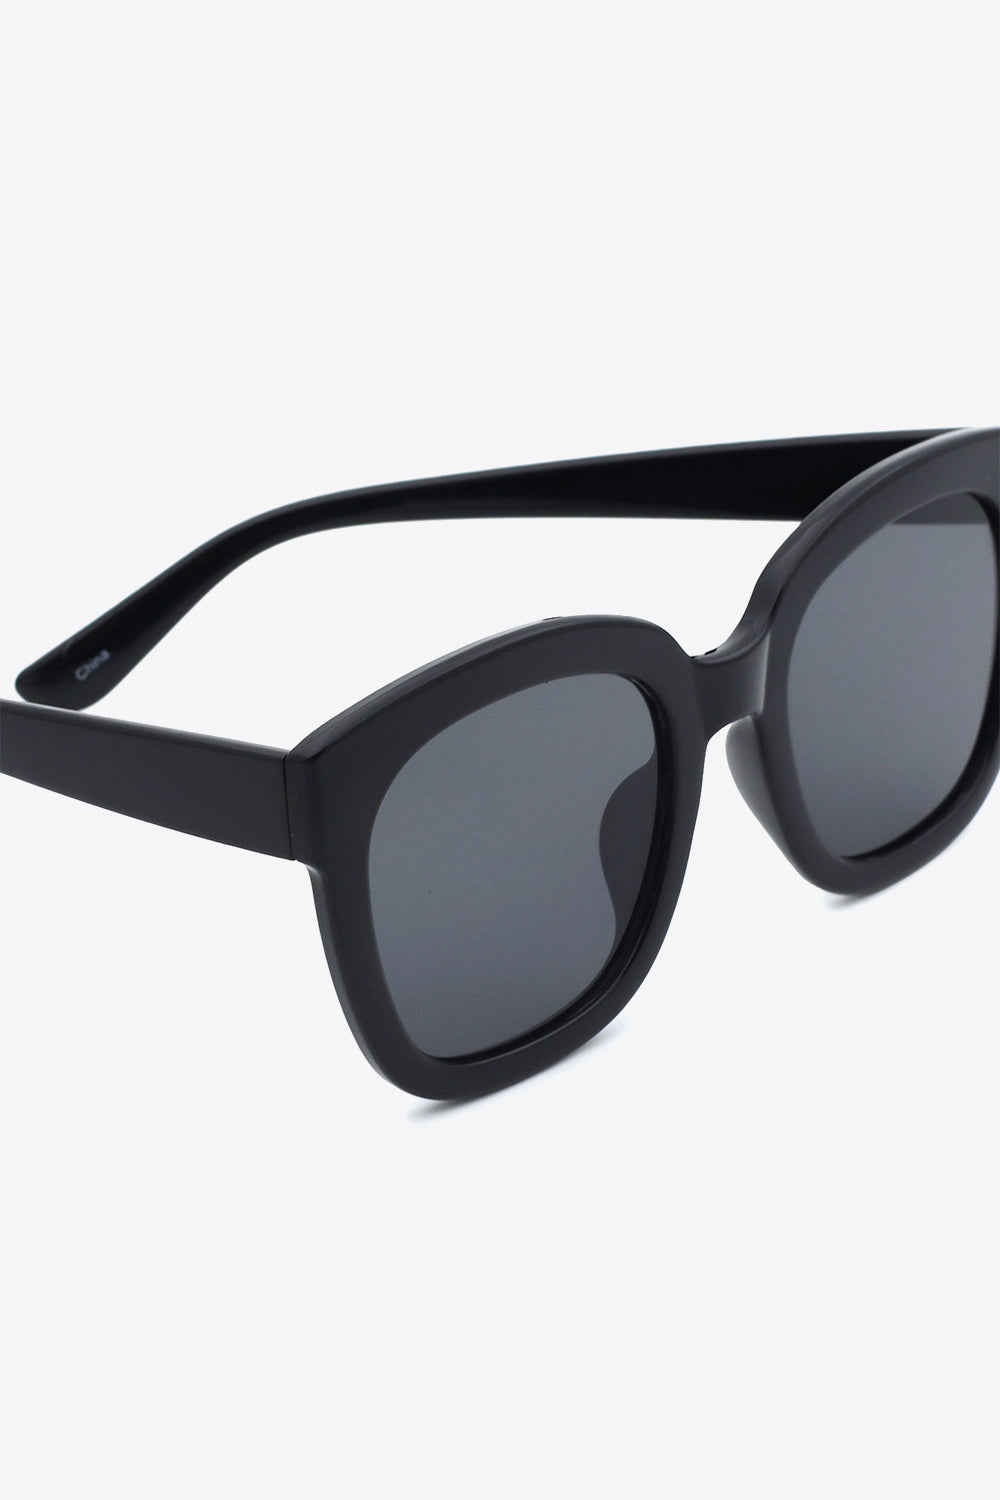 Polycarbonate Frame Square Sunglasses - Online Only